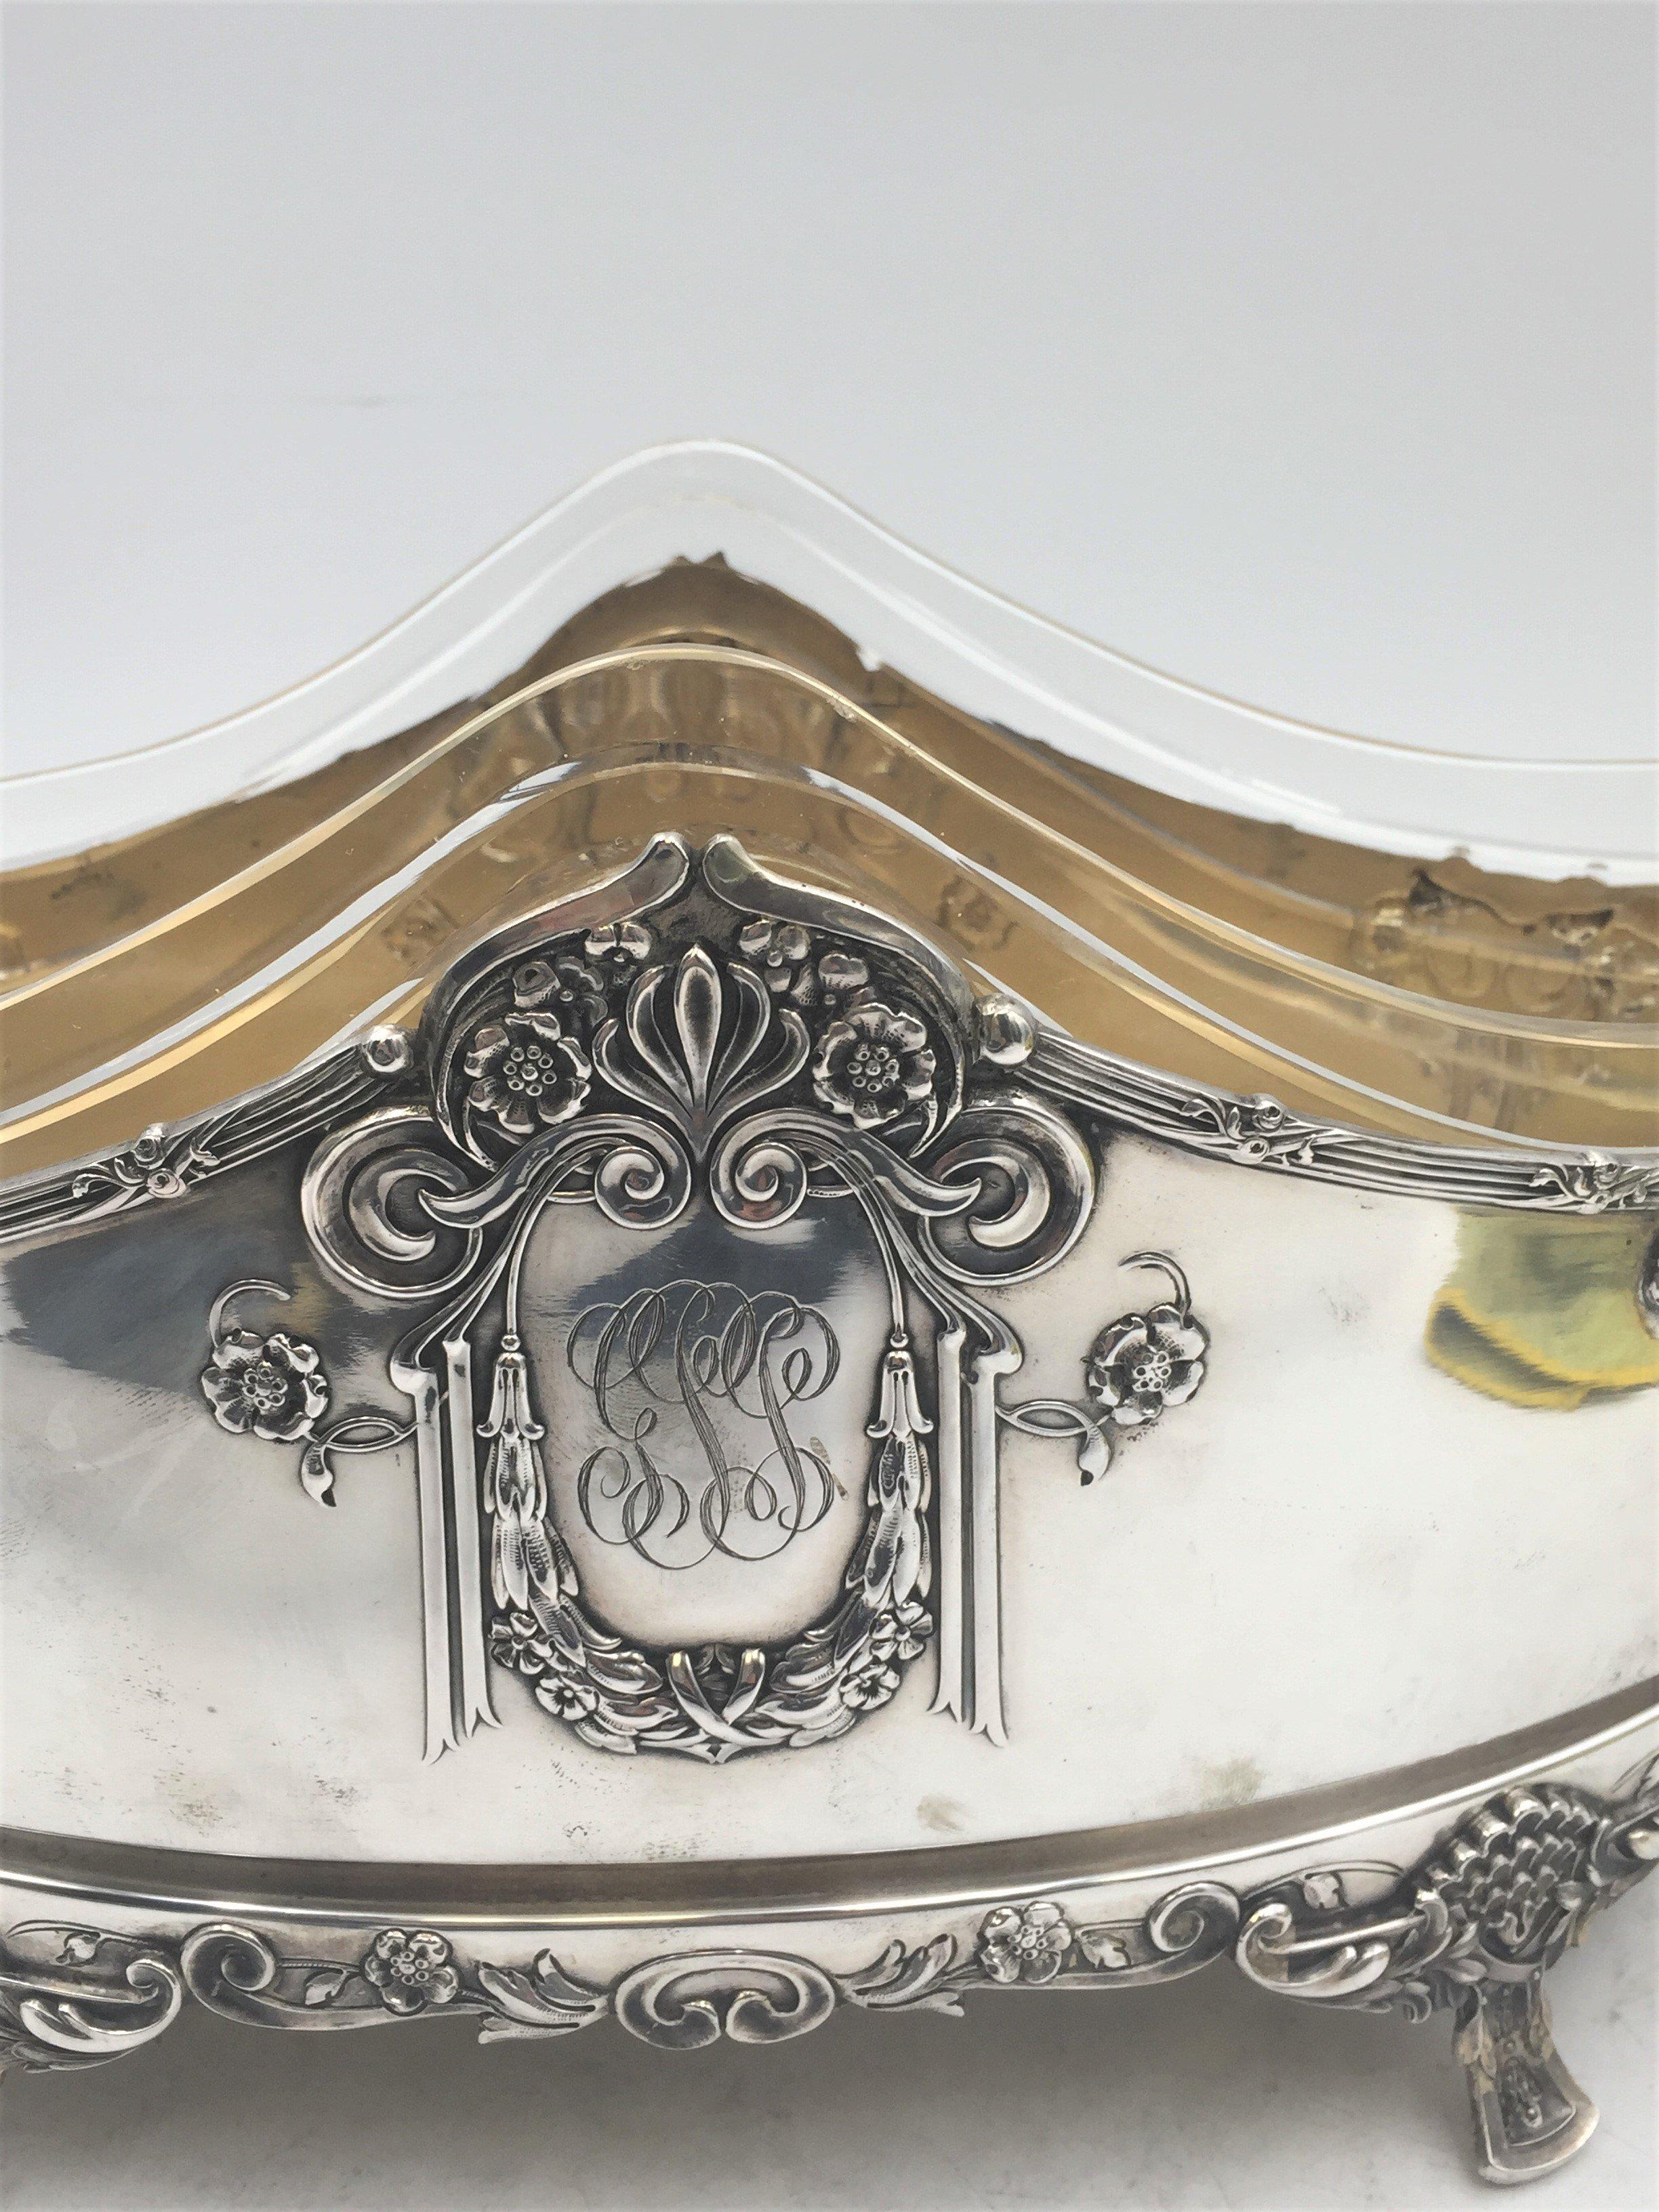 Austrian silver centerpiece / two-handled bowl with gilt interior in Art Nouveau design. Expertly constructed in Olomouc/Olmutz (1872-1921). Its design uses beautiful floral and ornamental motifs in raised relief. Comes with a glass insert, which